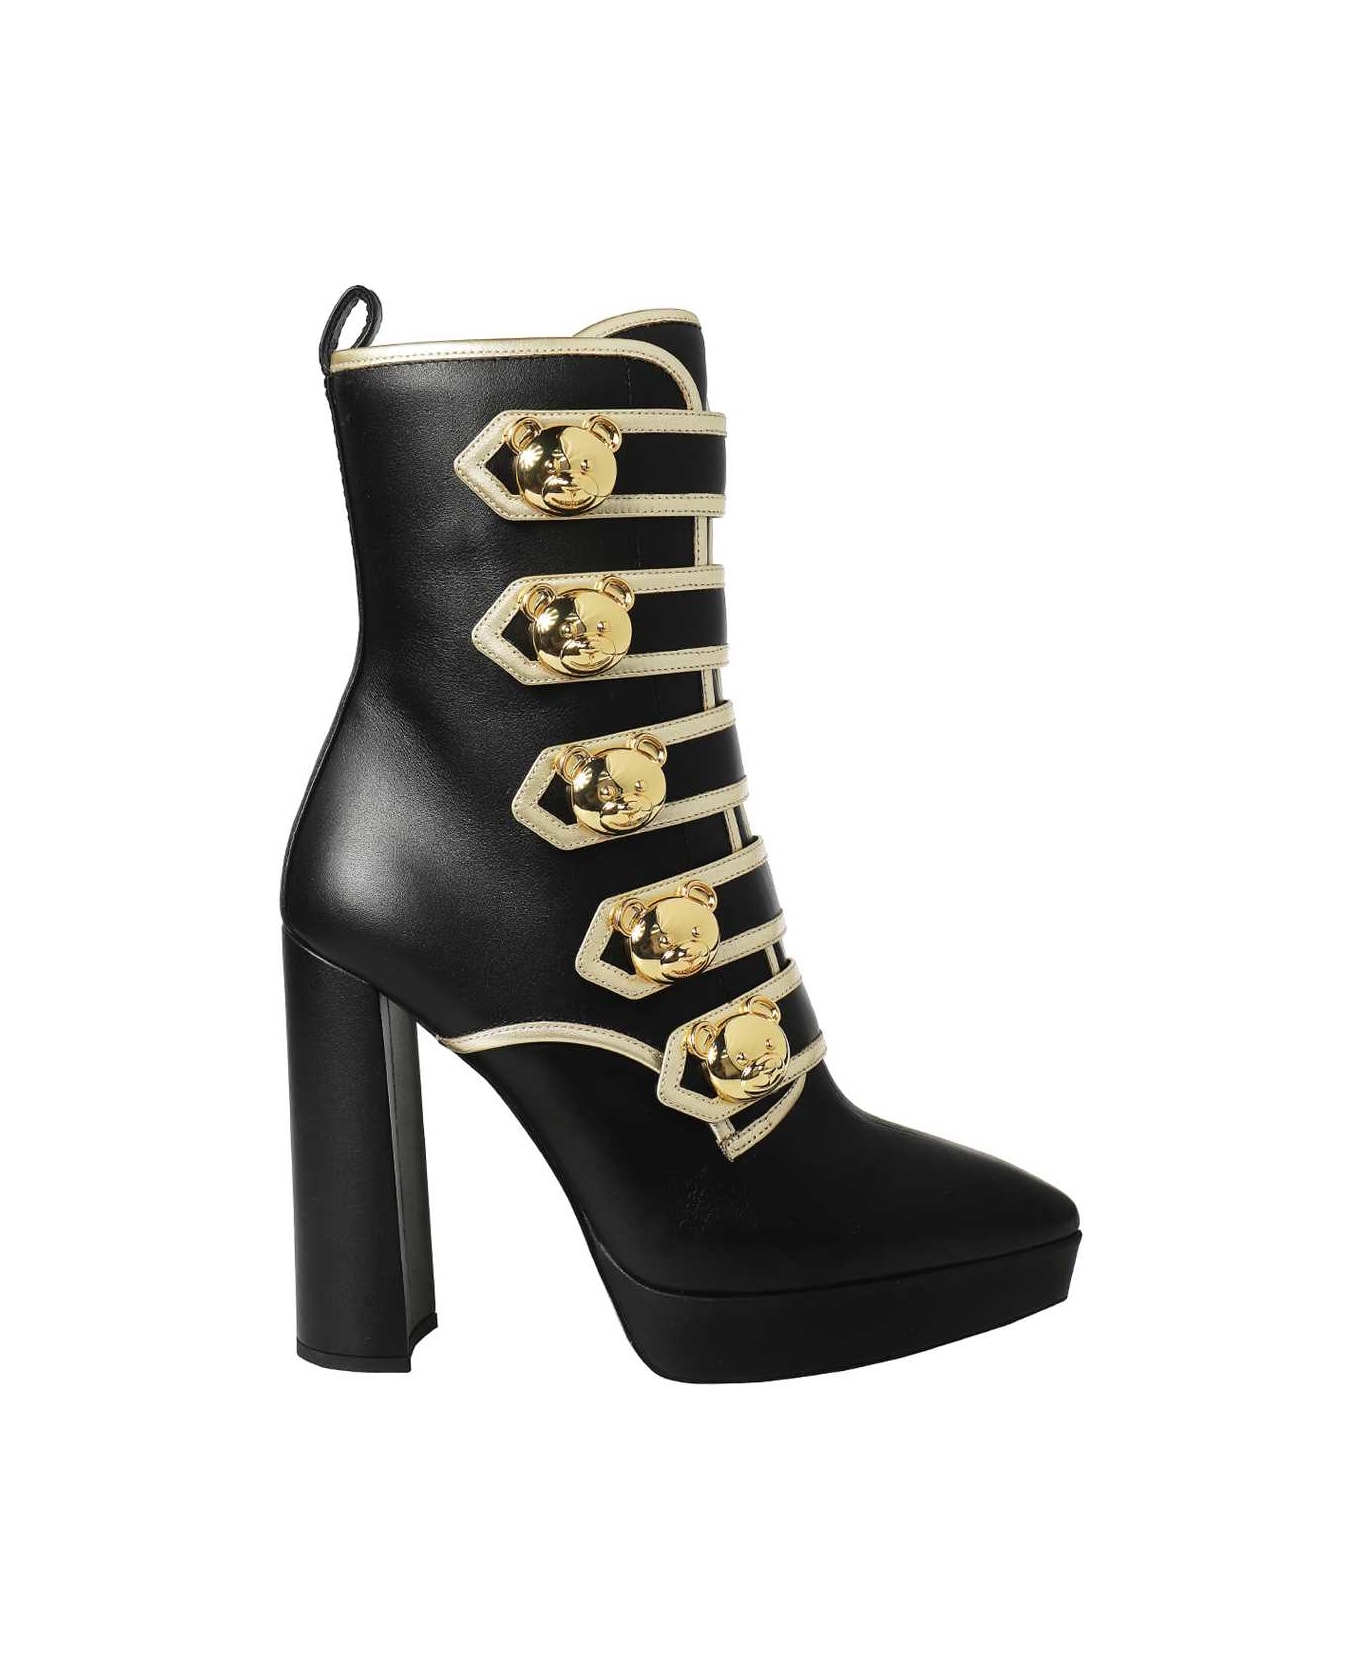 Moschino Leather Ankle Boots - black